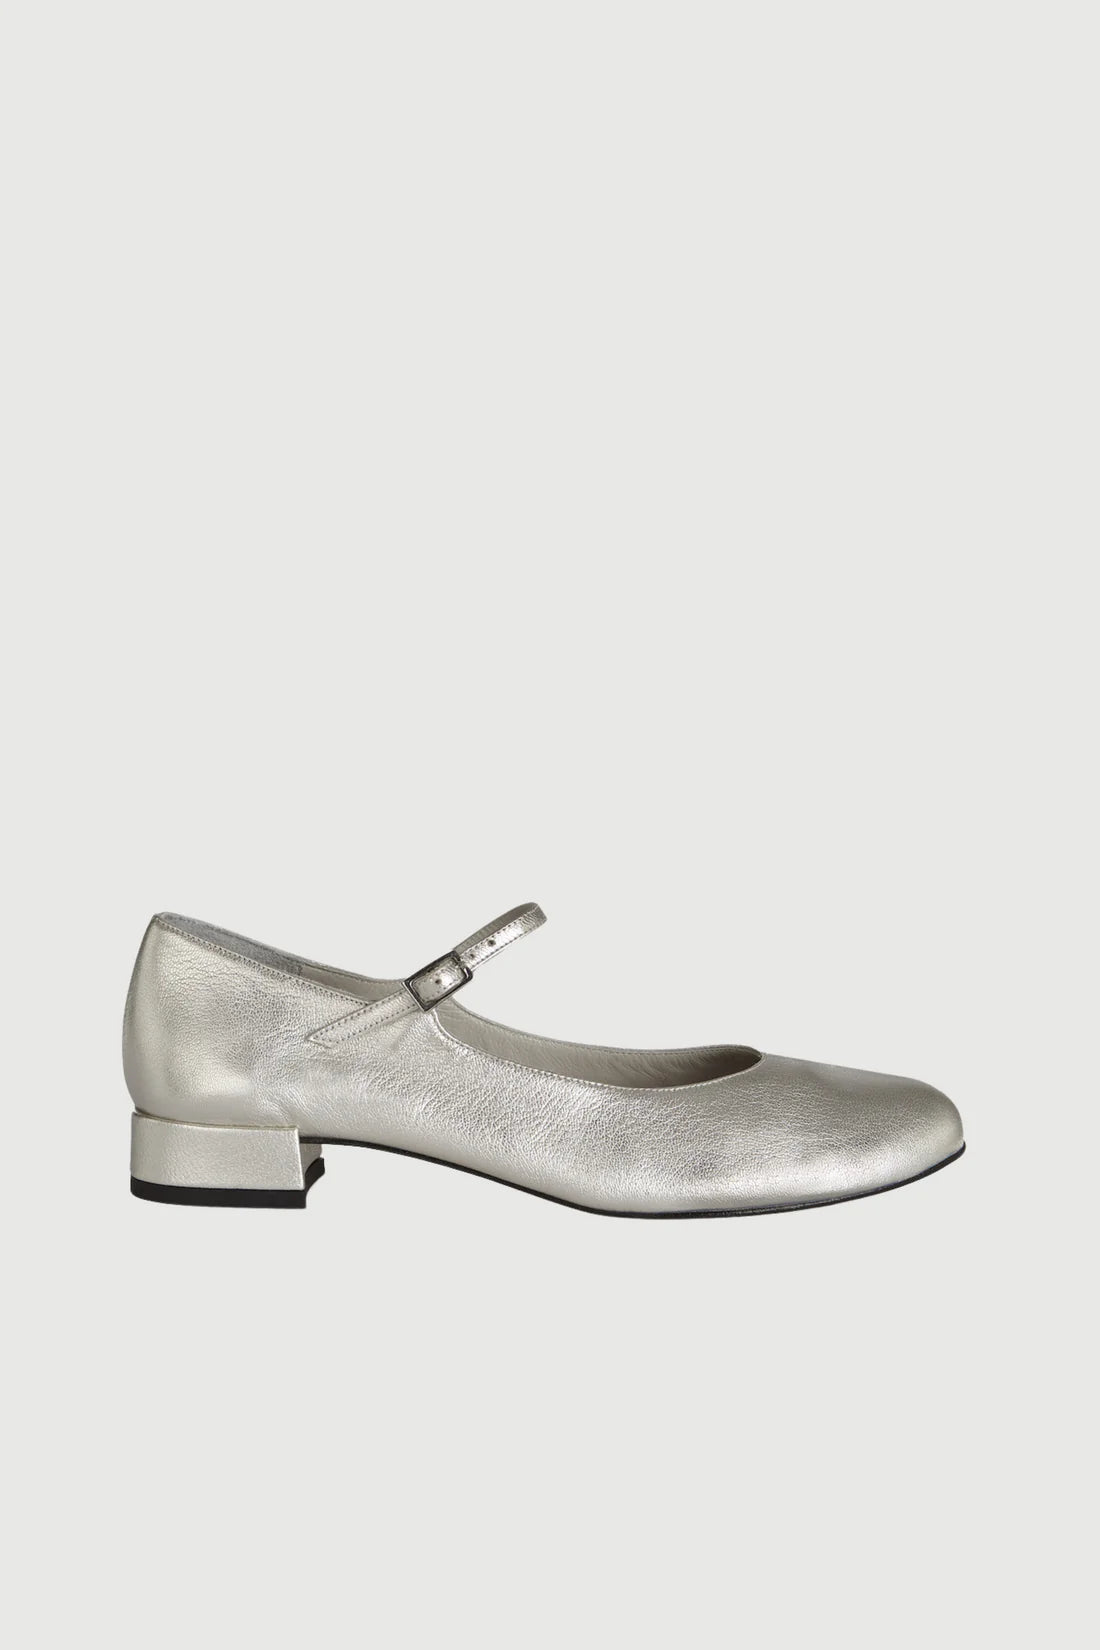 Emilia Mary Jane Shoes Augusta Silver 36 